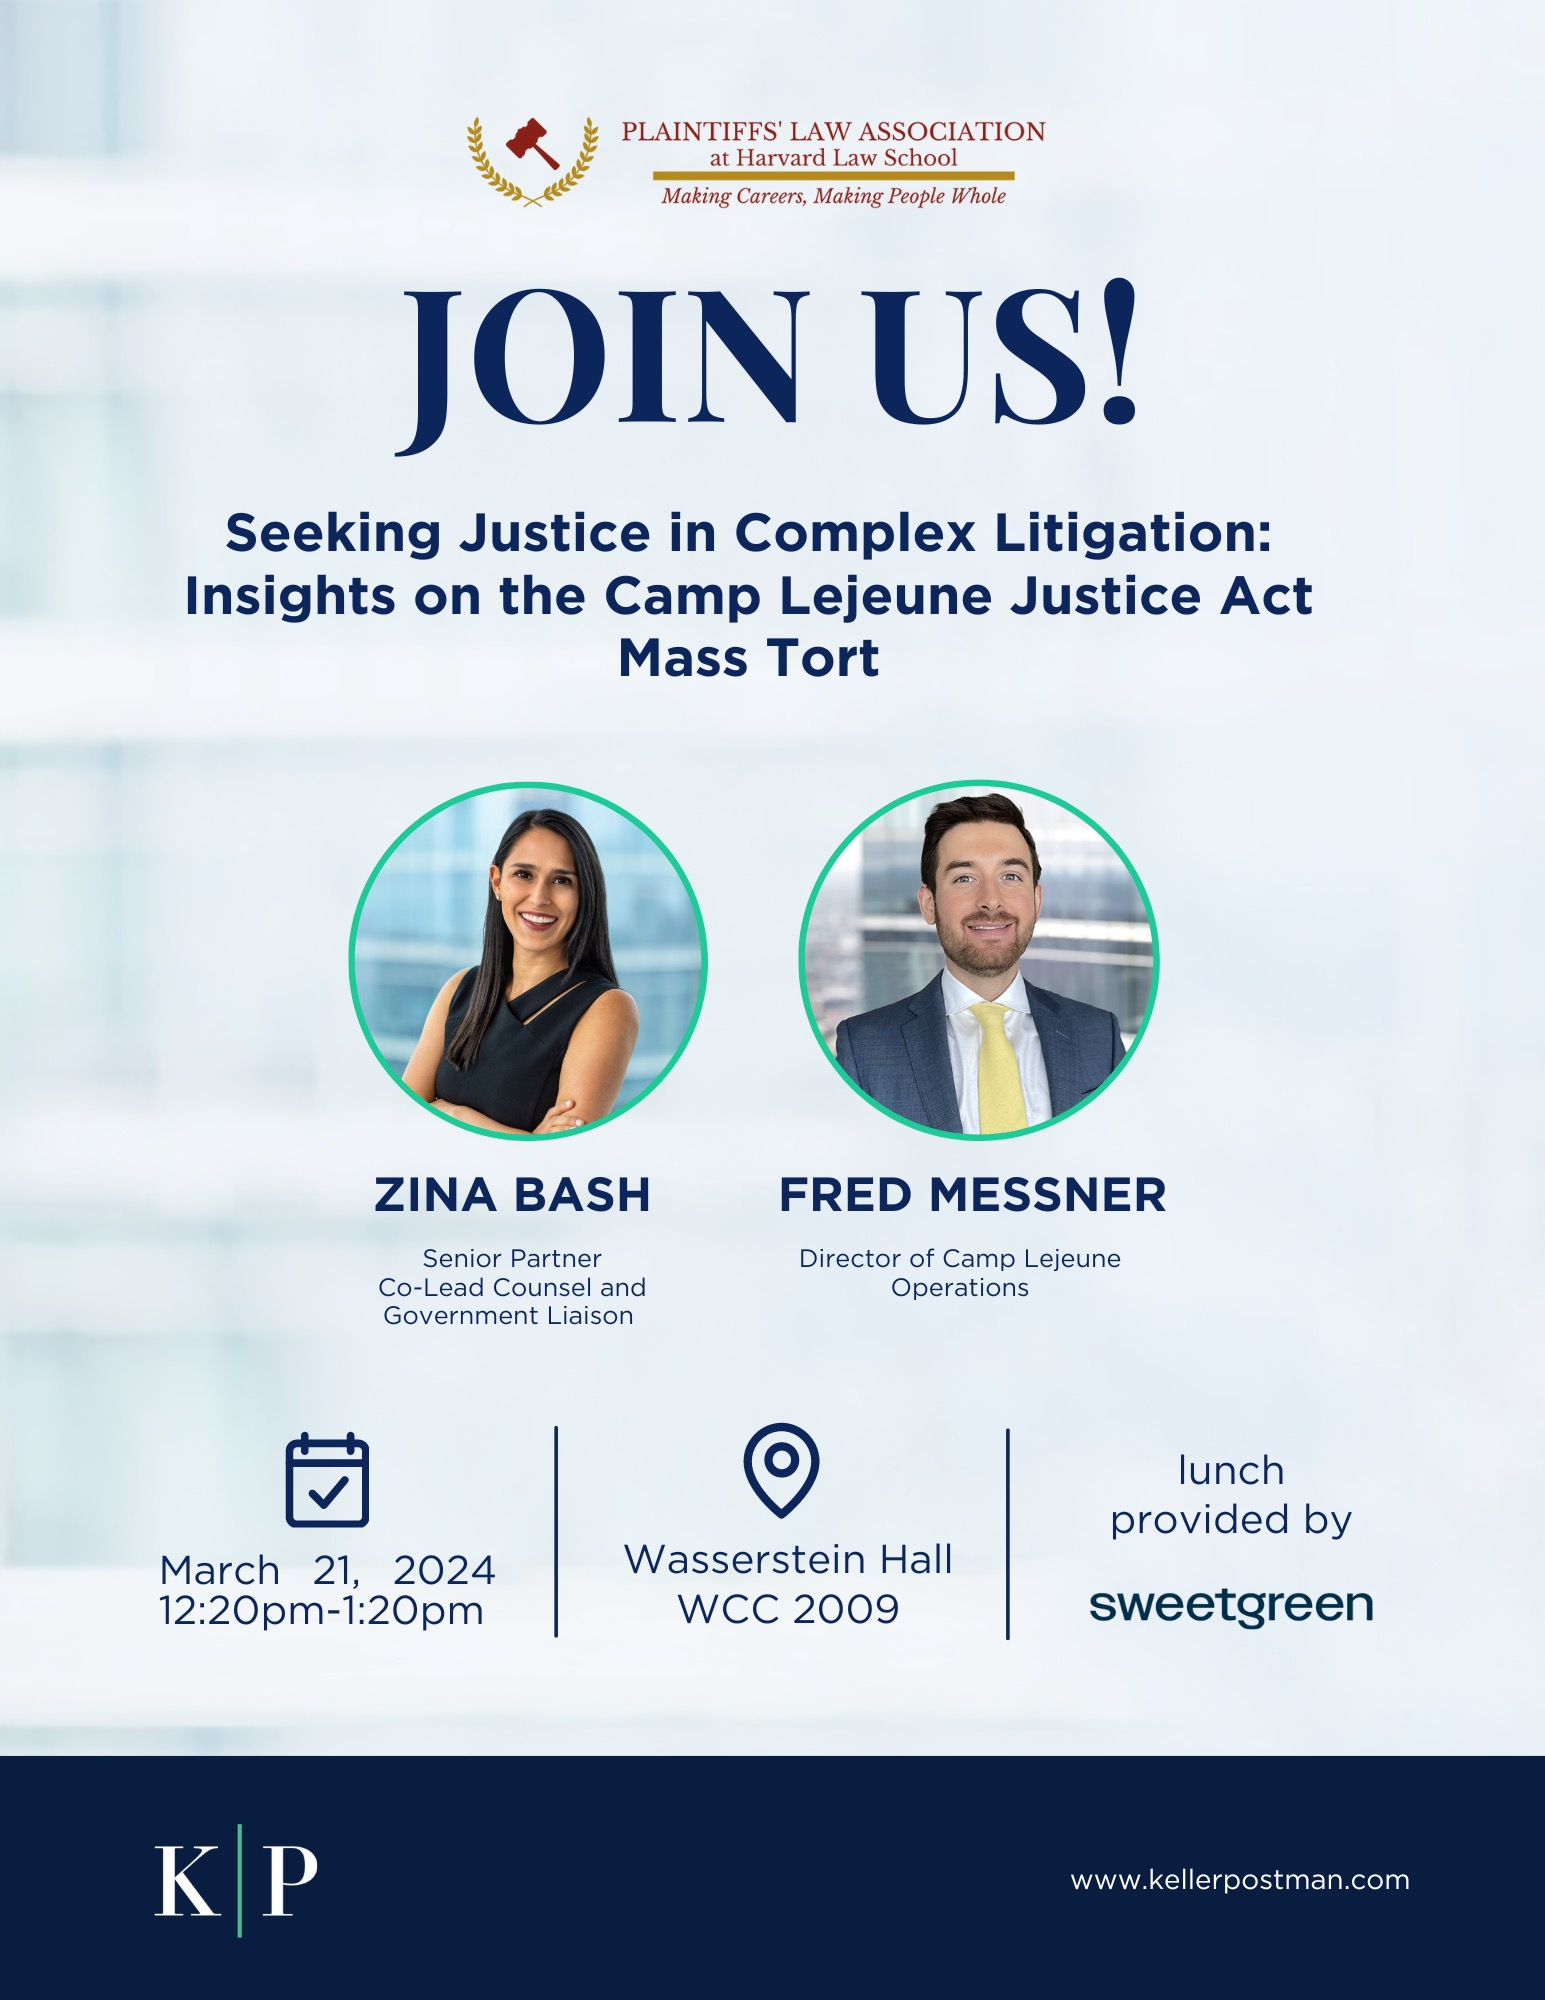 JOIN US! Seeking Justice in Complex Litigation: Insights on the Camp Lejeune Justice Act Mass Tort with Keller Postman Zina Bash, Senior Partner, Co-lead counsel and government liason Fred Messner, Director of Camp Lejune Operations